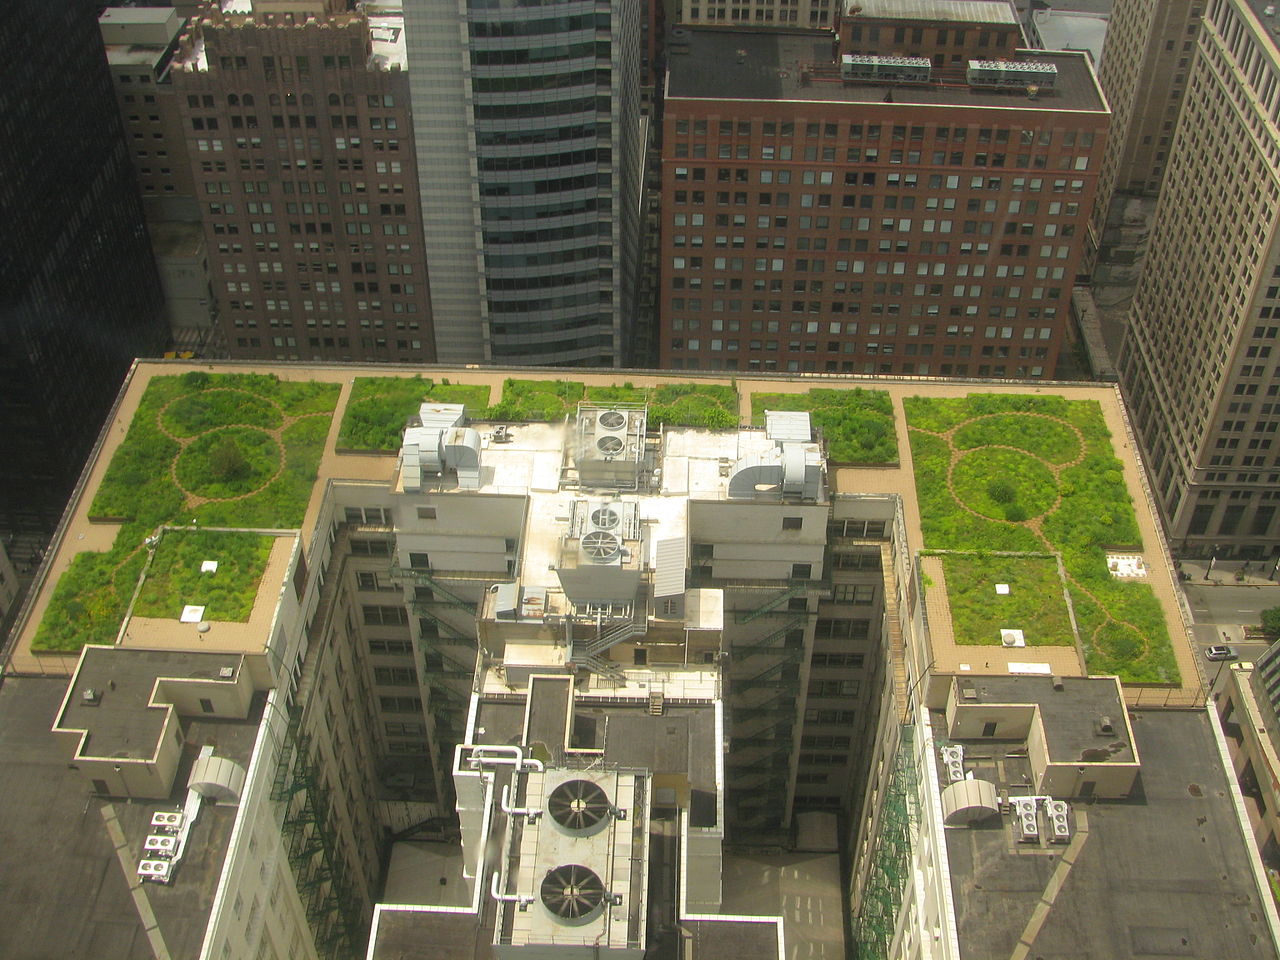 Green roof of Chicago City Hall